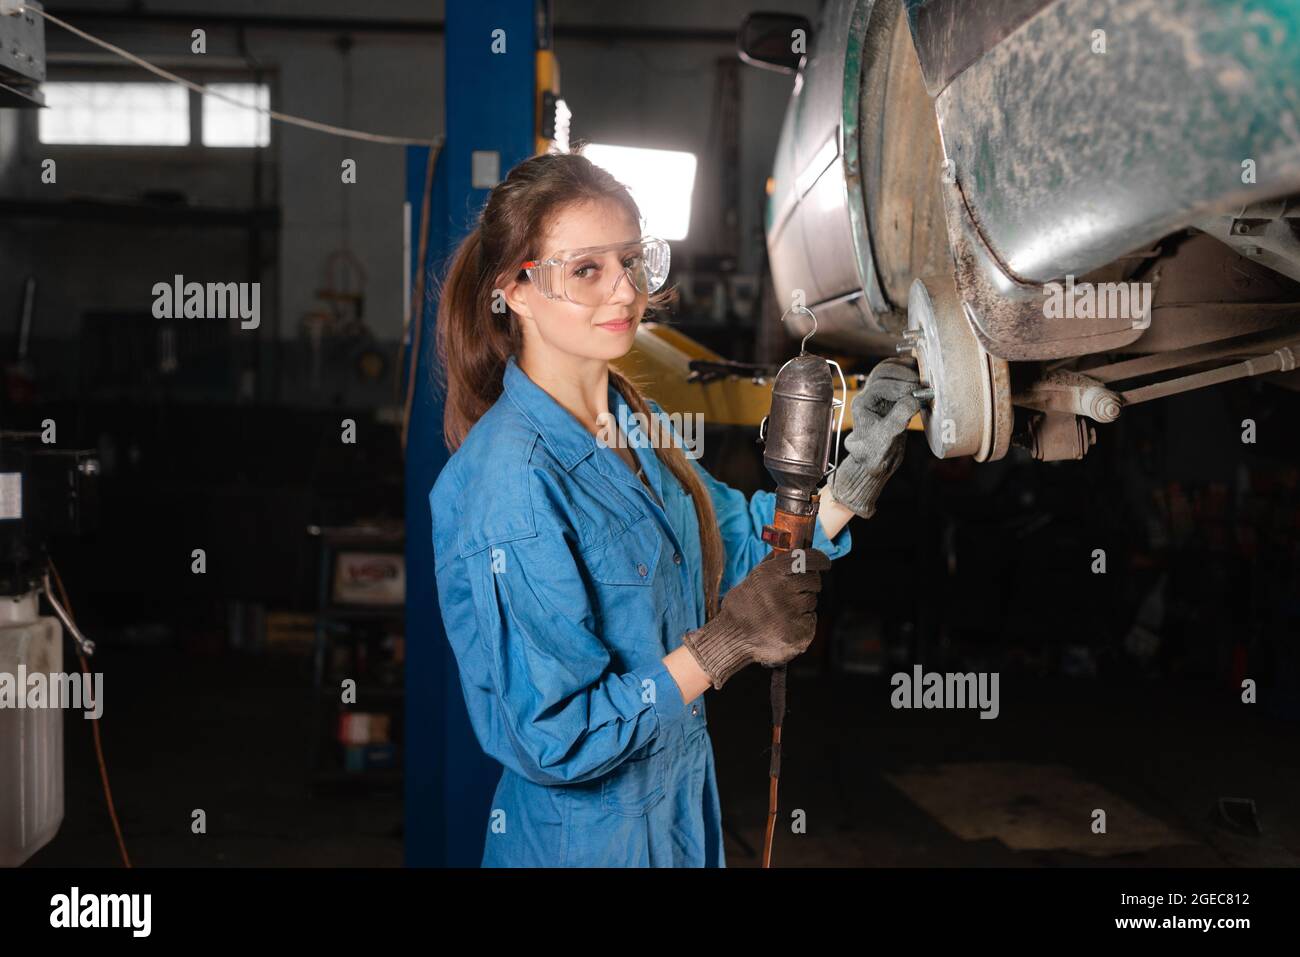 Caucasian woman car mechanic at a real car service station stands and does an inspection of the chassis. Stock Photo